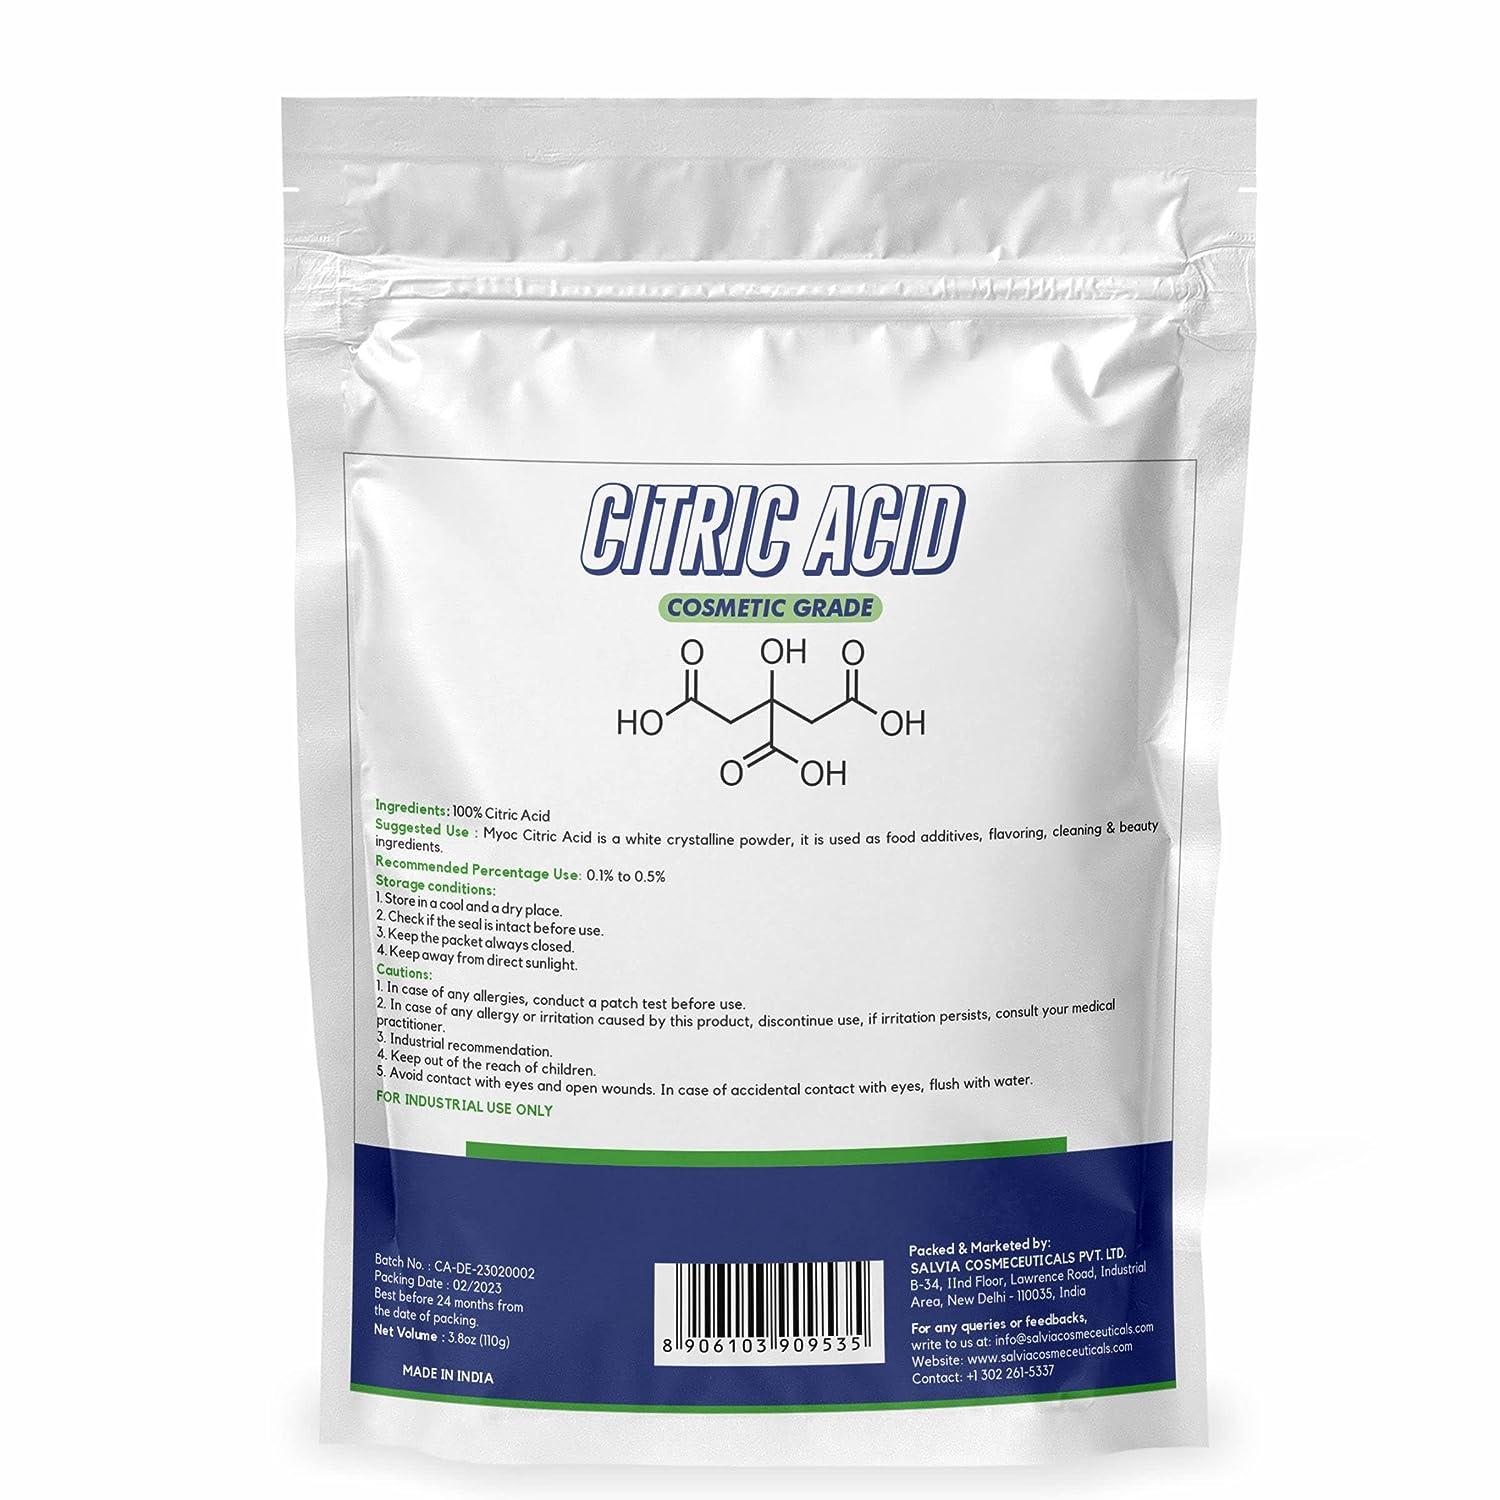 Myoc Pure Citric Acid Powder for Cleaning Grocery & Gourmet Food Bath Bombs  Citric Acid